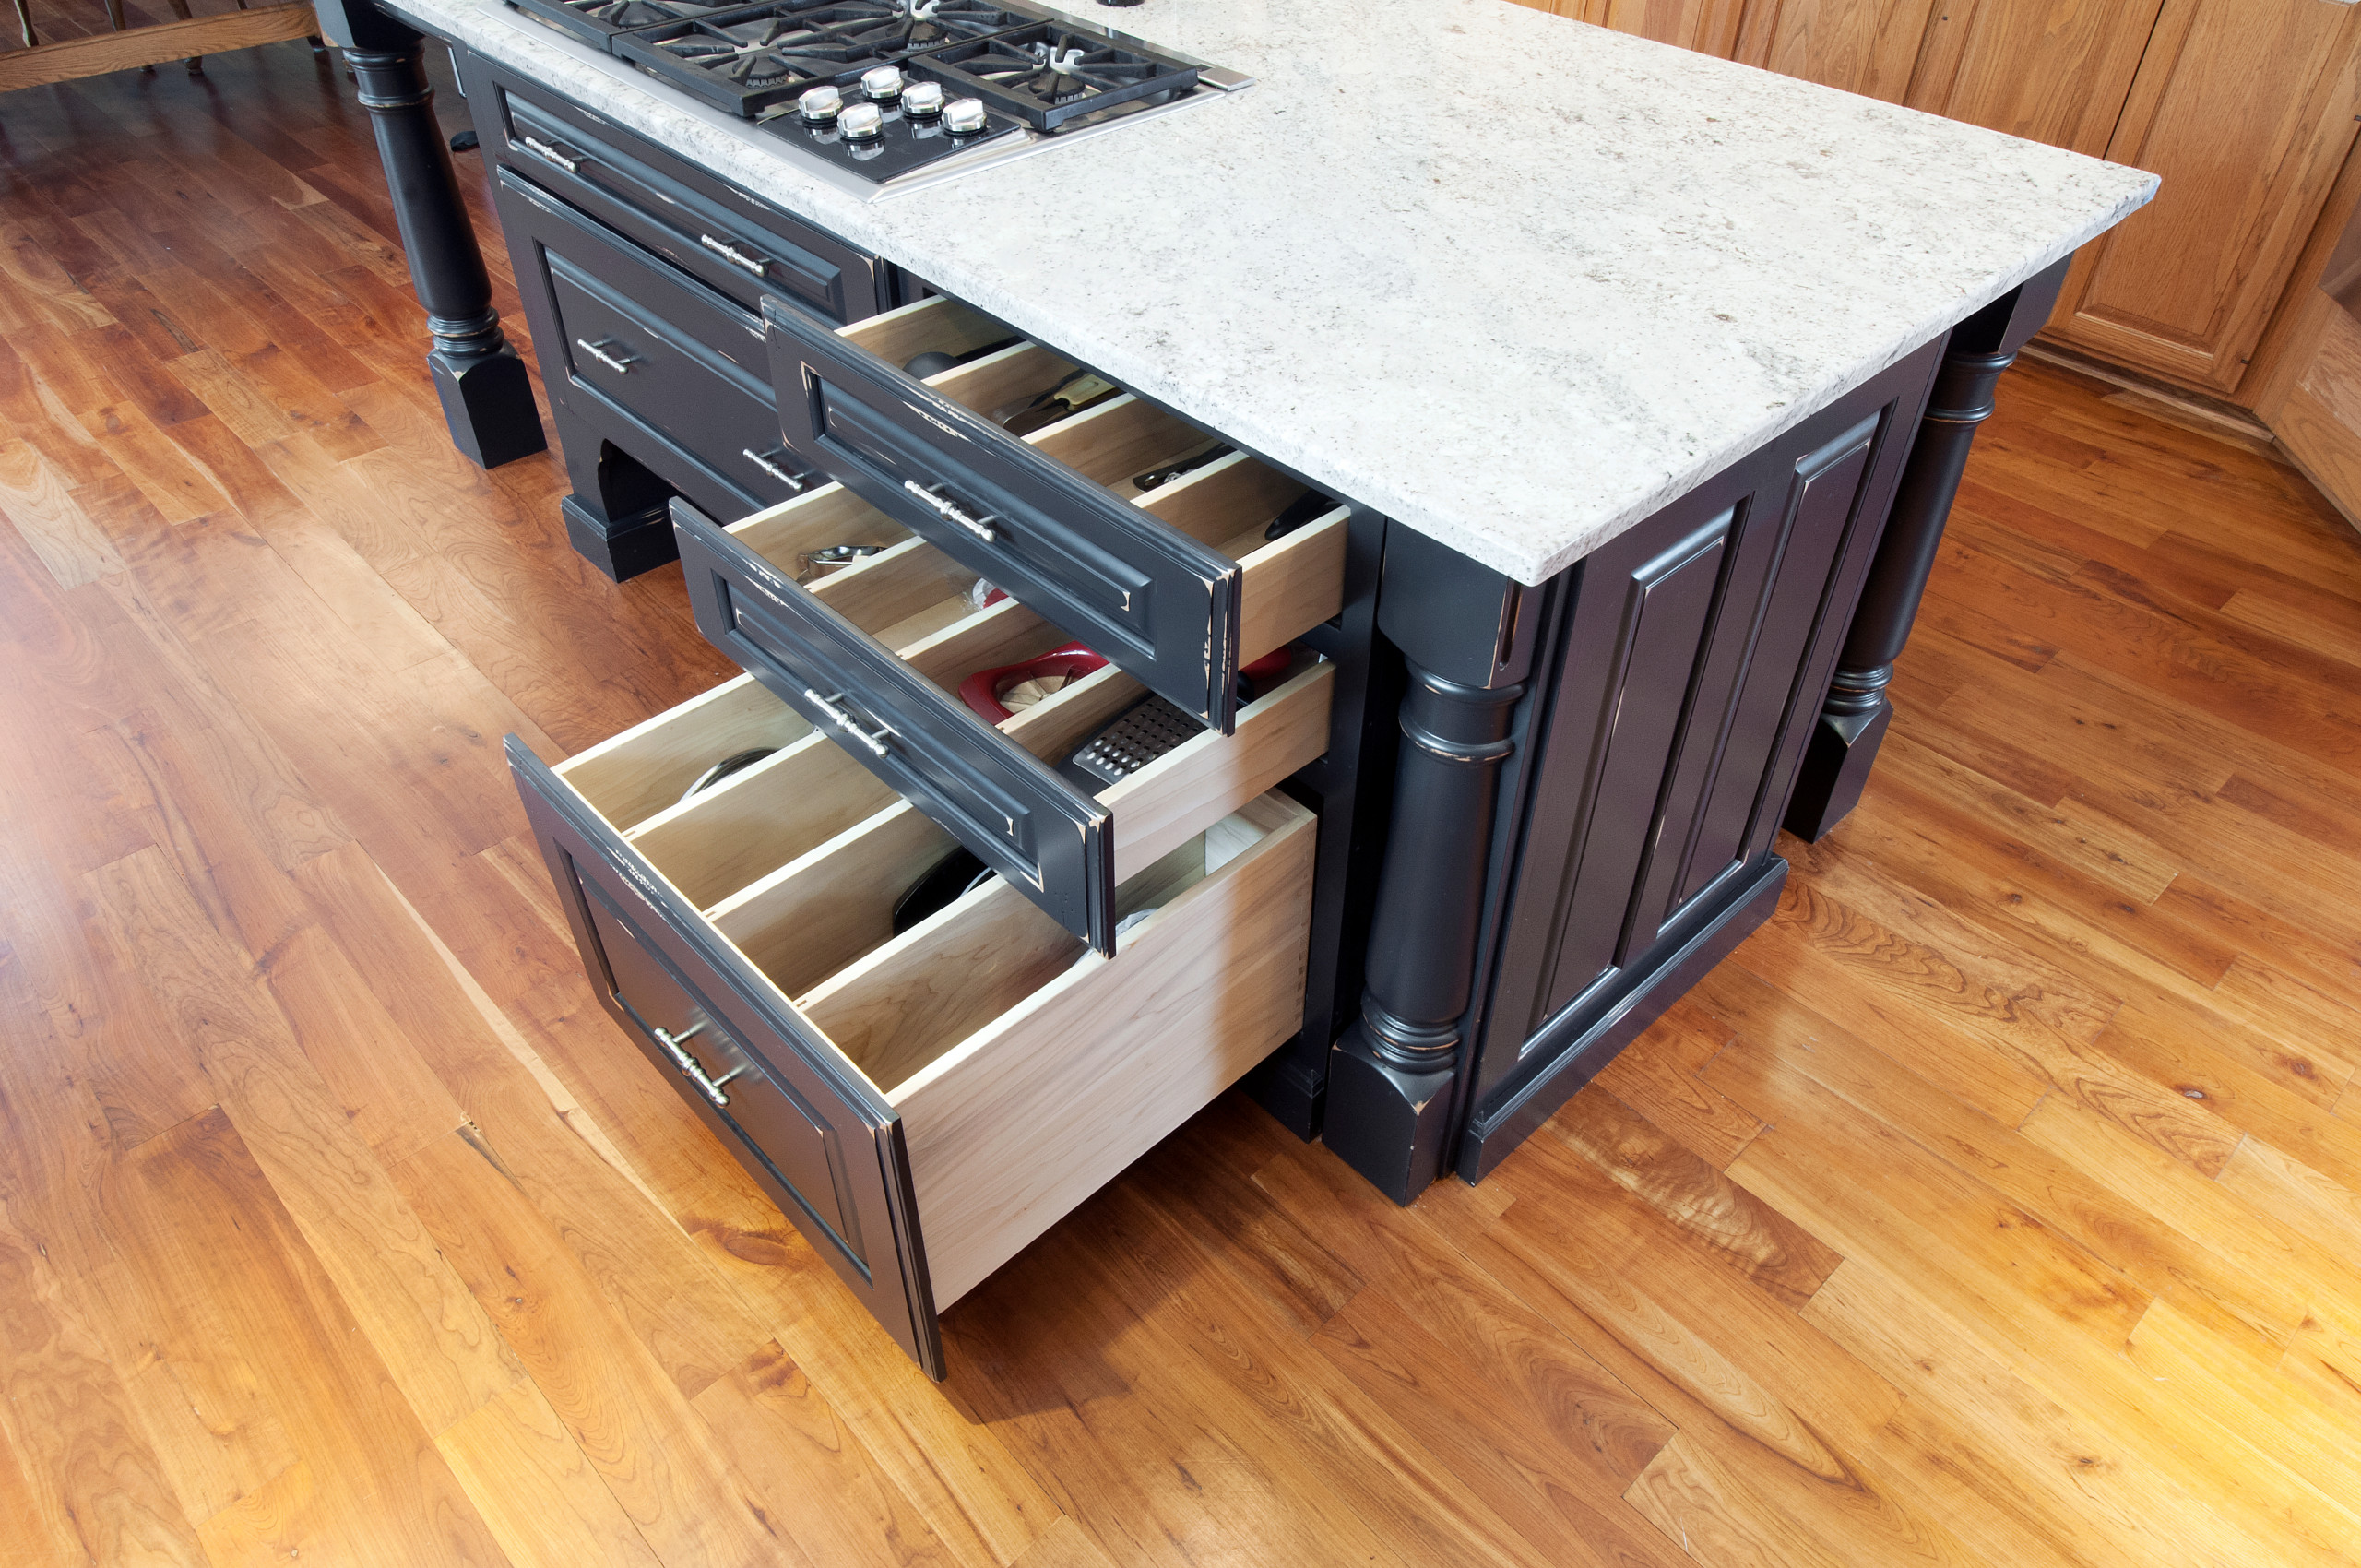 Accessible Tray and Utensil Drawer Dividers